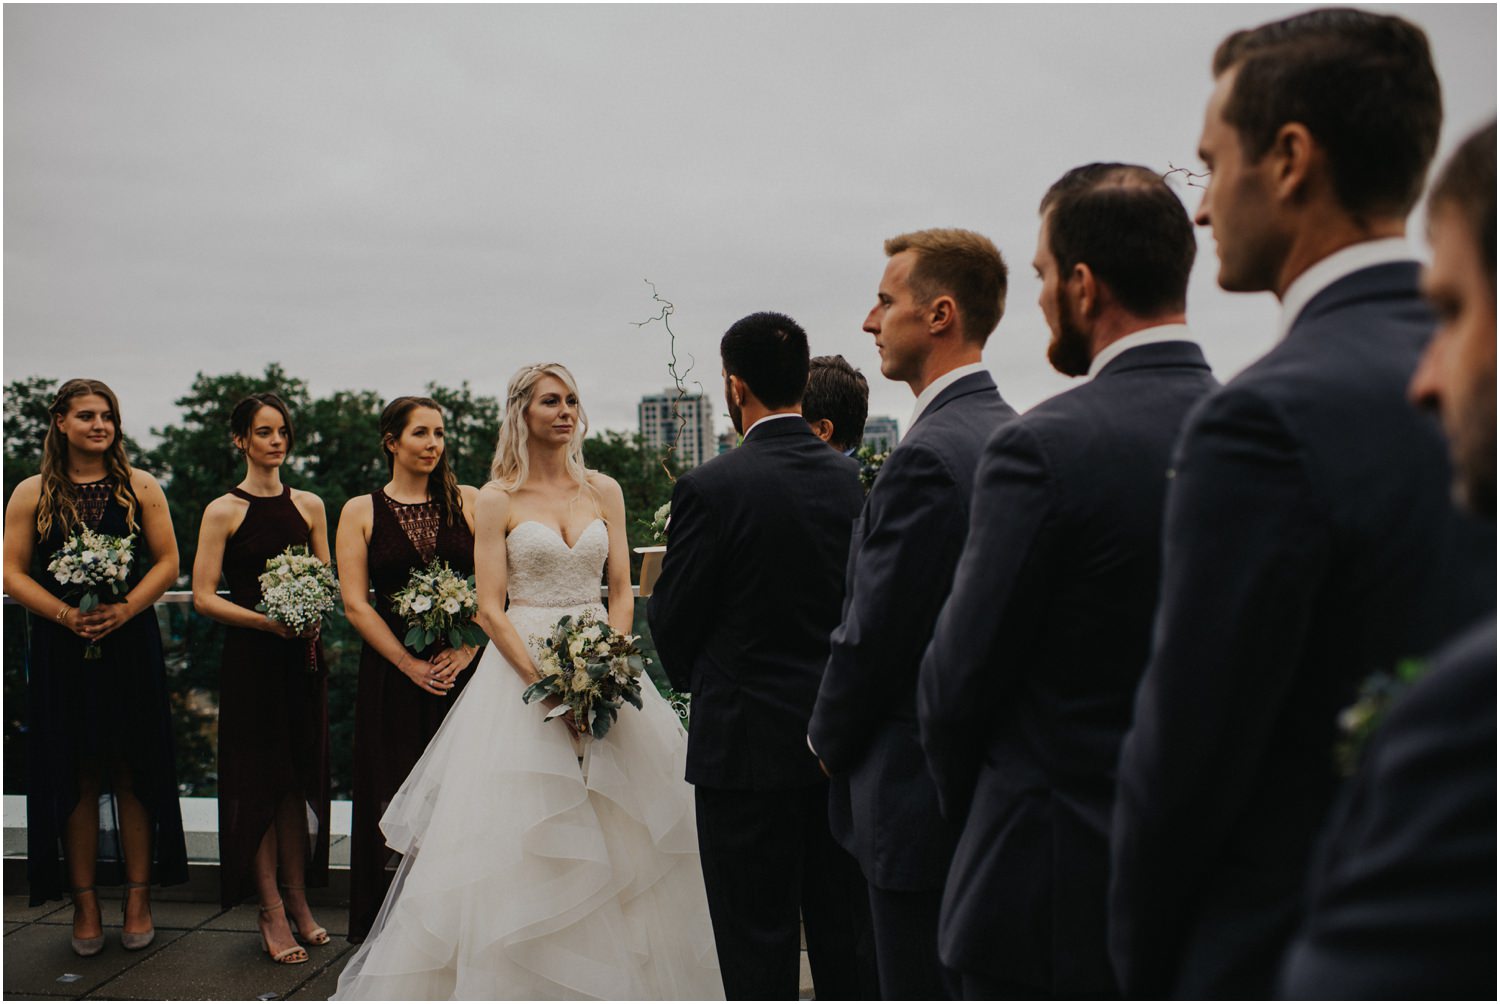 The View on Lonsdale - Vancouver Wedding